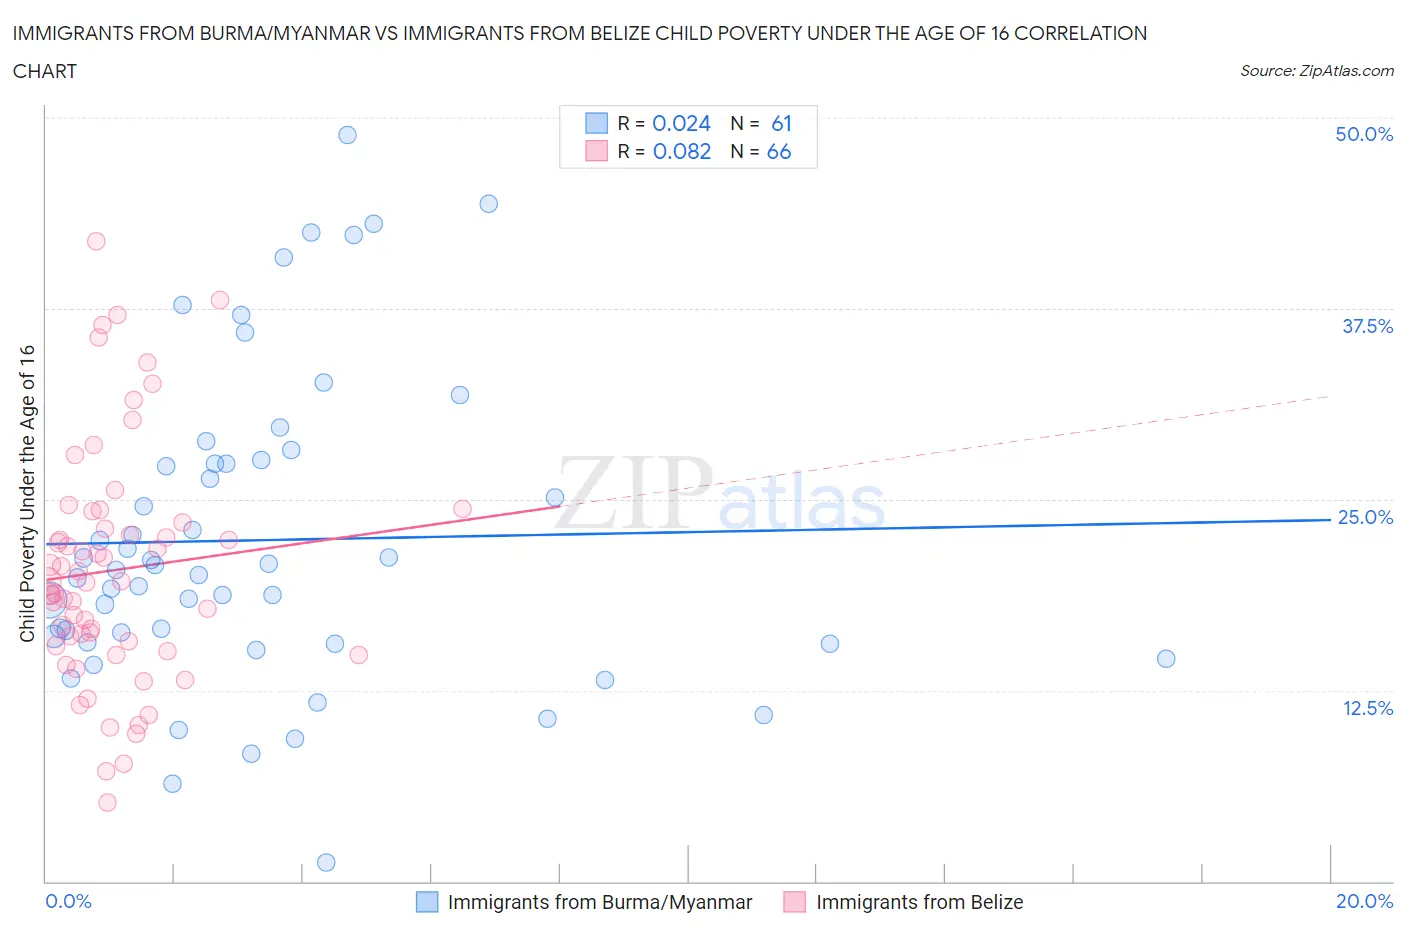 Immigrants from Burma/Myanmar vs Immigrants from Belize Child Poverty Under the Age of 16